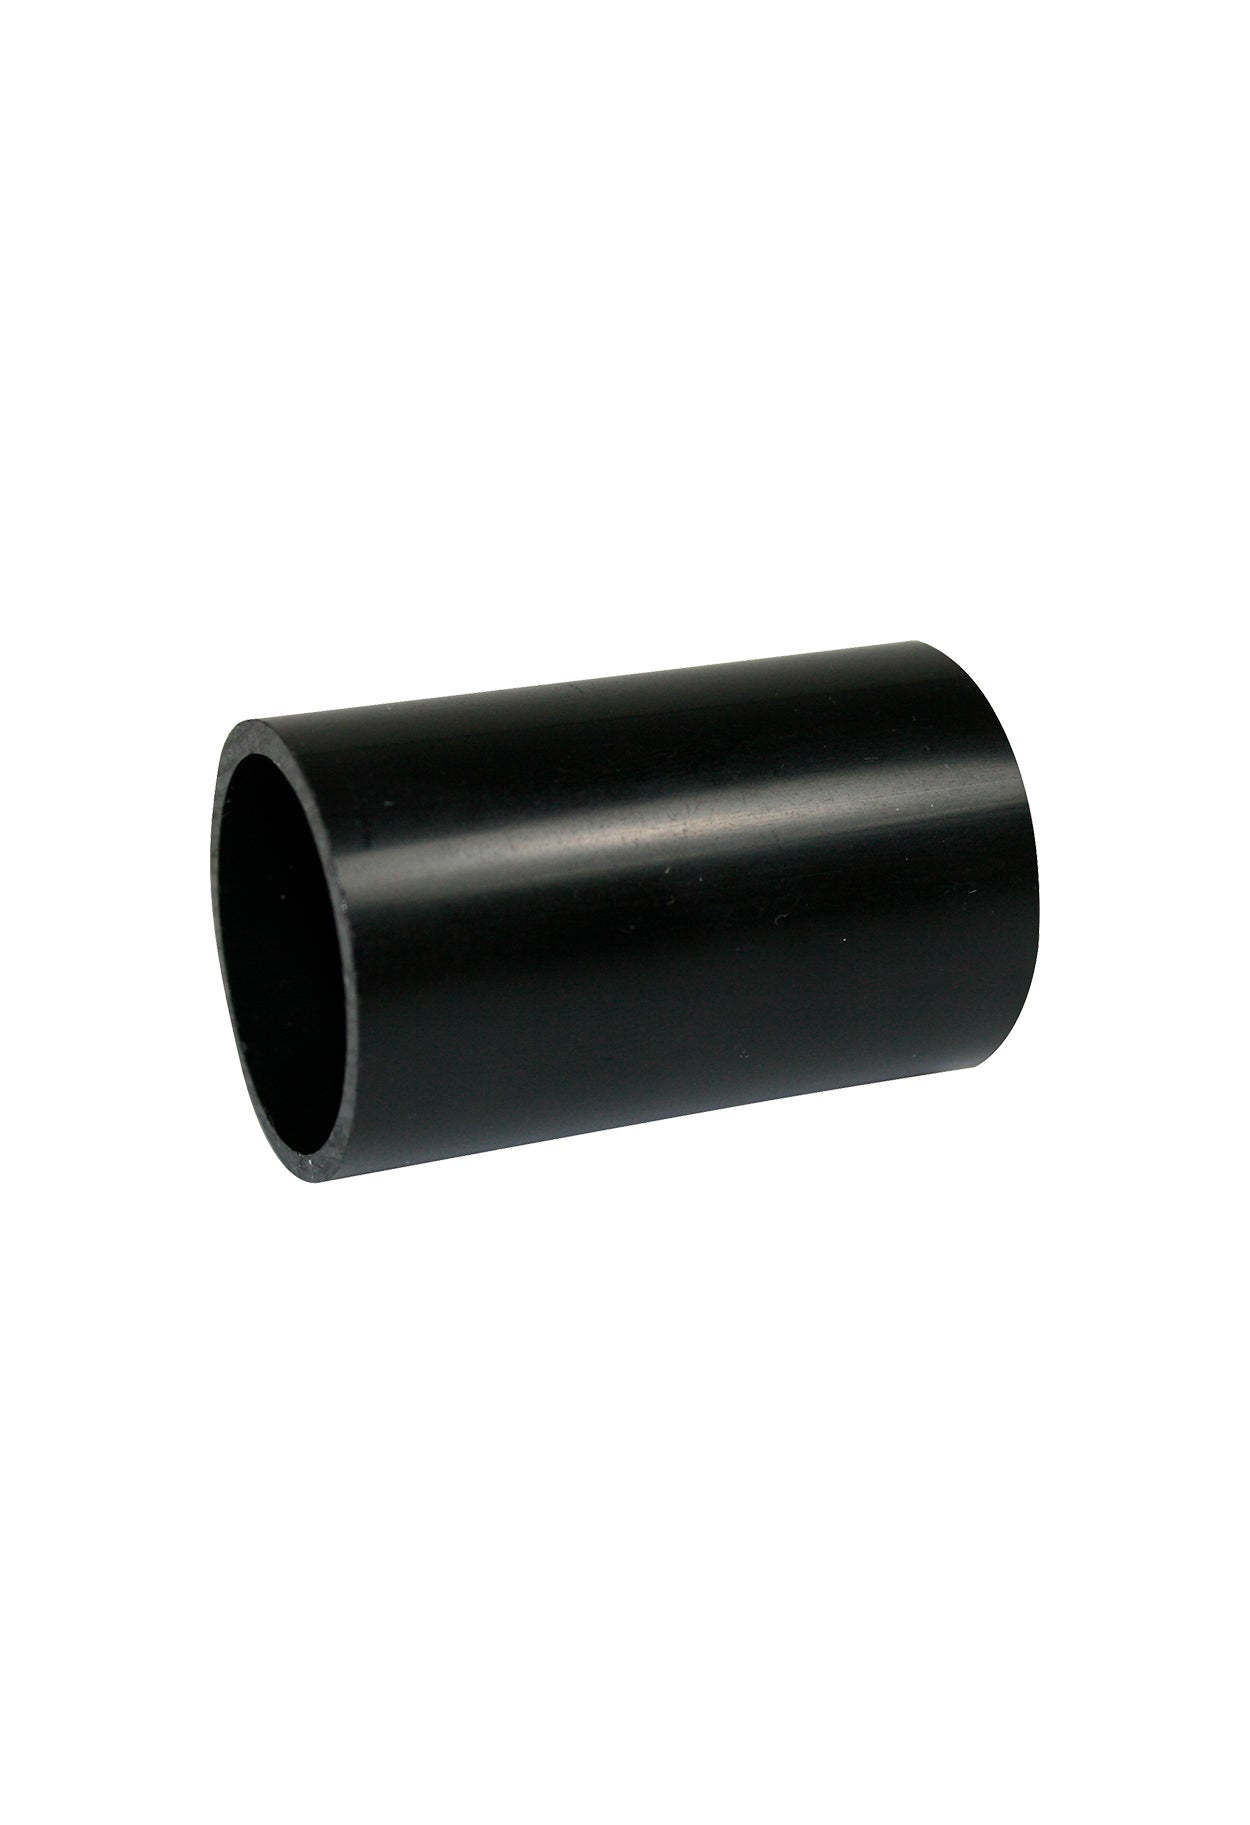 Connector pipe for Privy hose